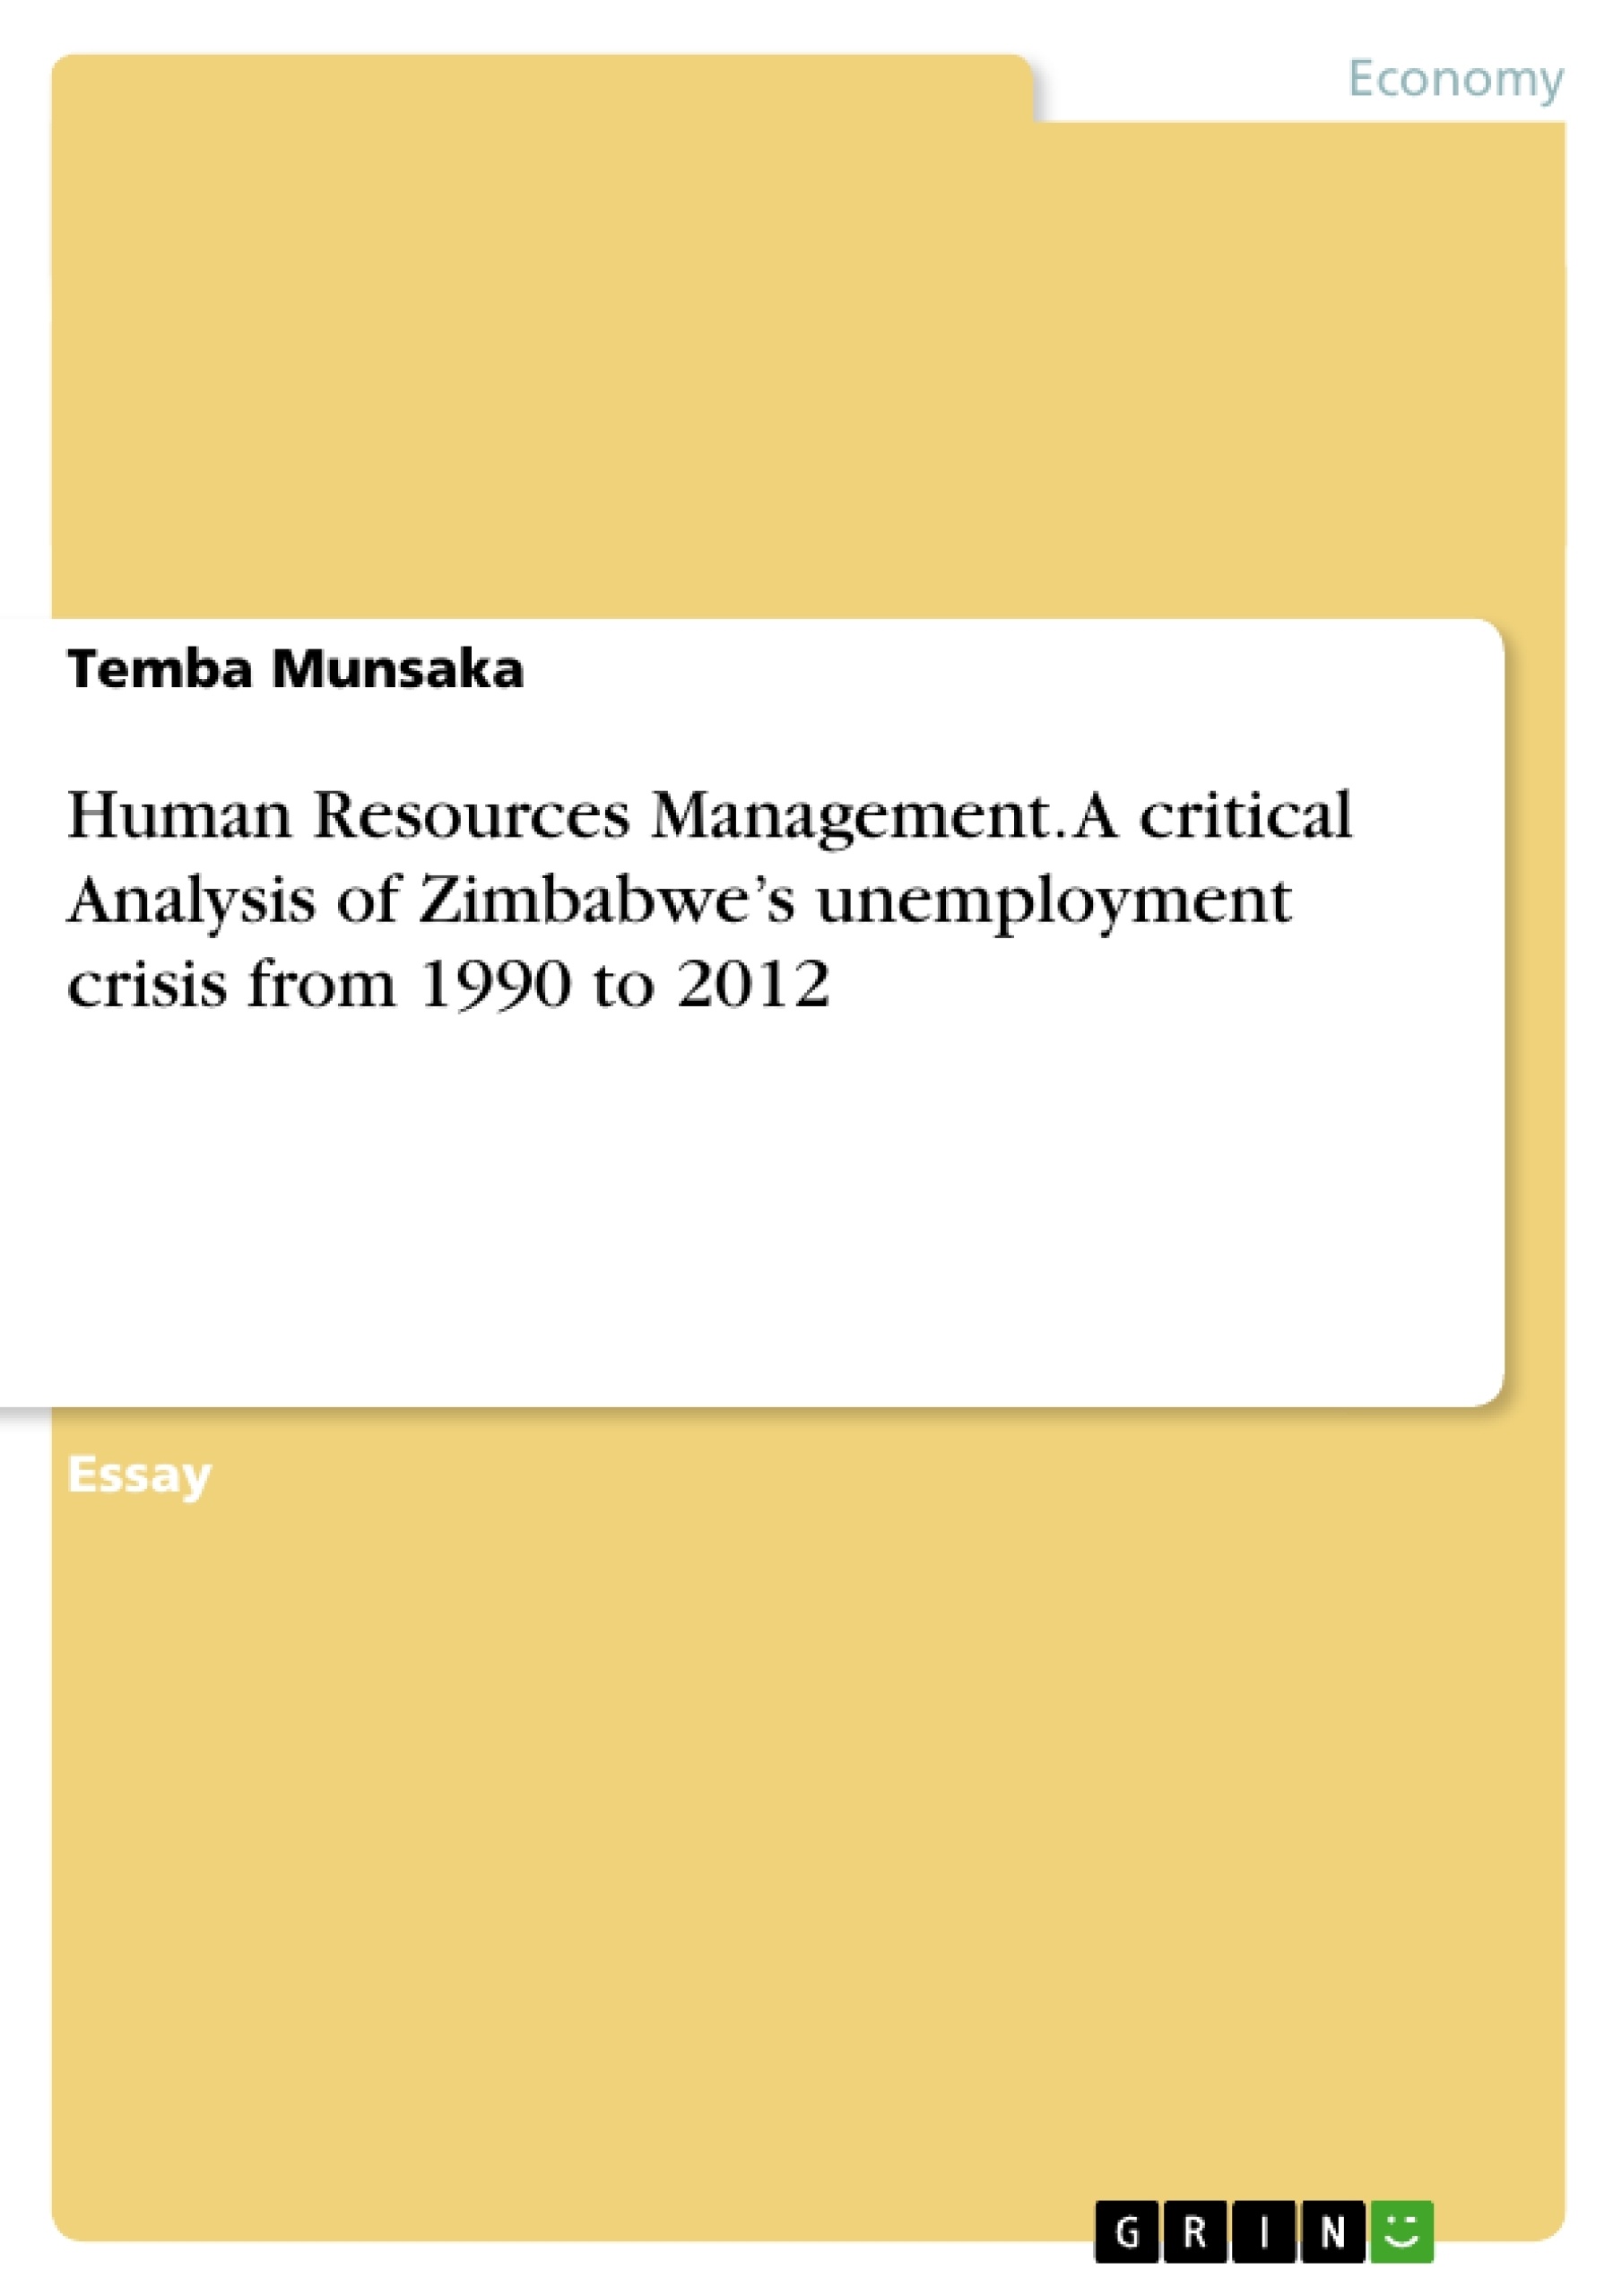 Titre: Human Resources Management. A critical Analysis of Zimbabwe’s unemployment crisis from 1990 to 2012